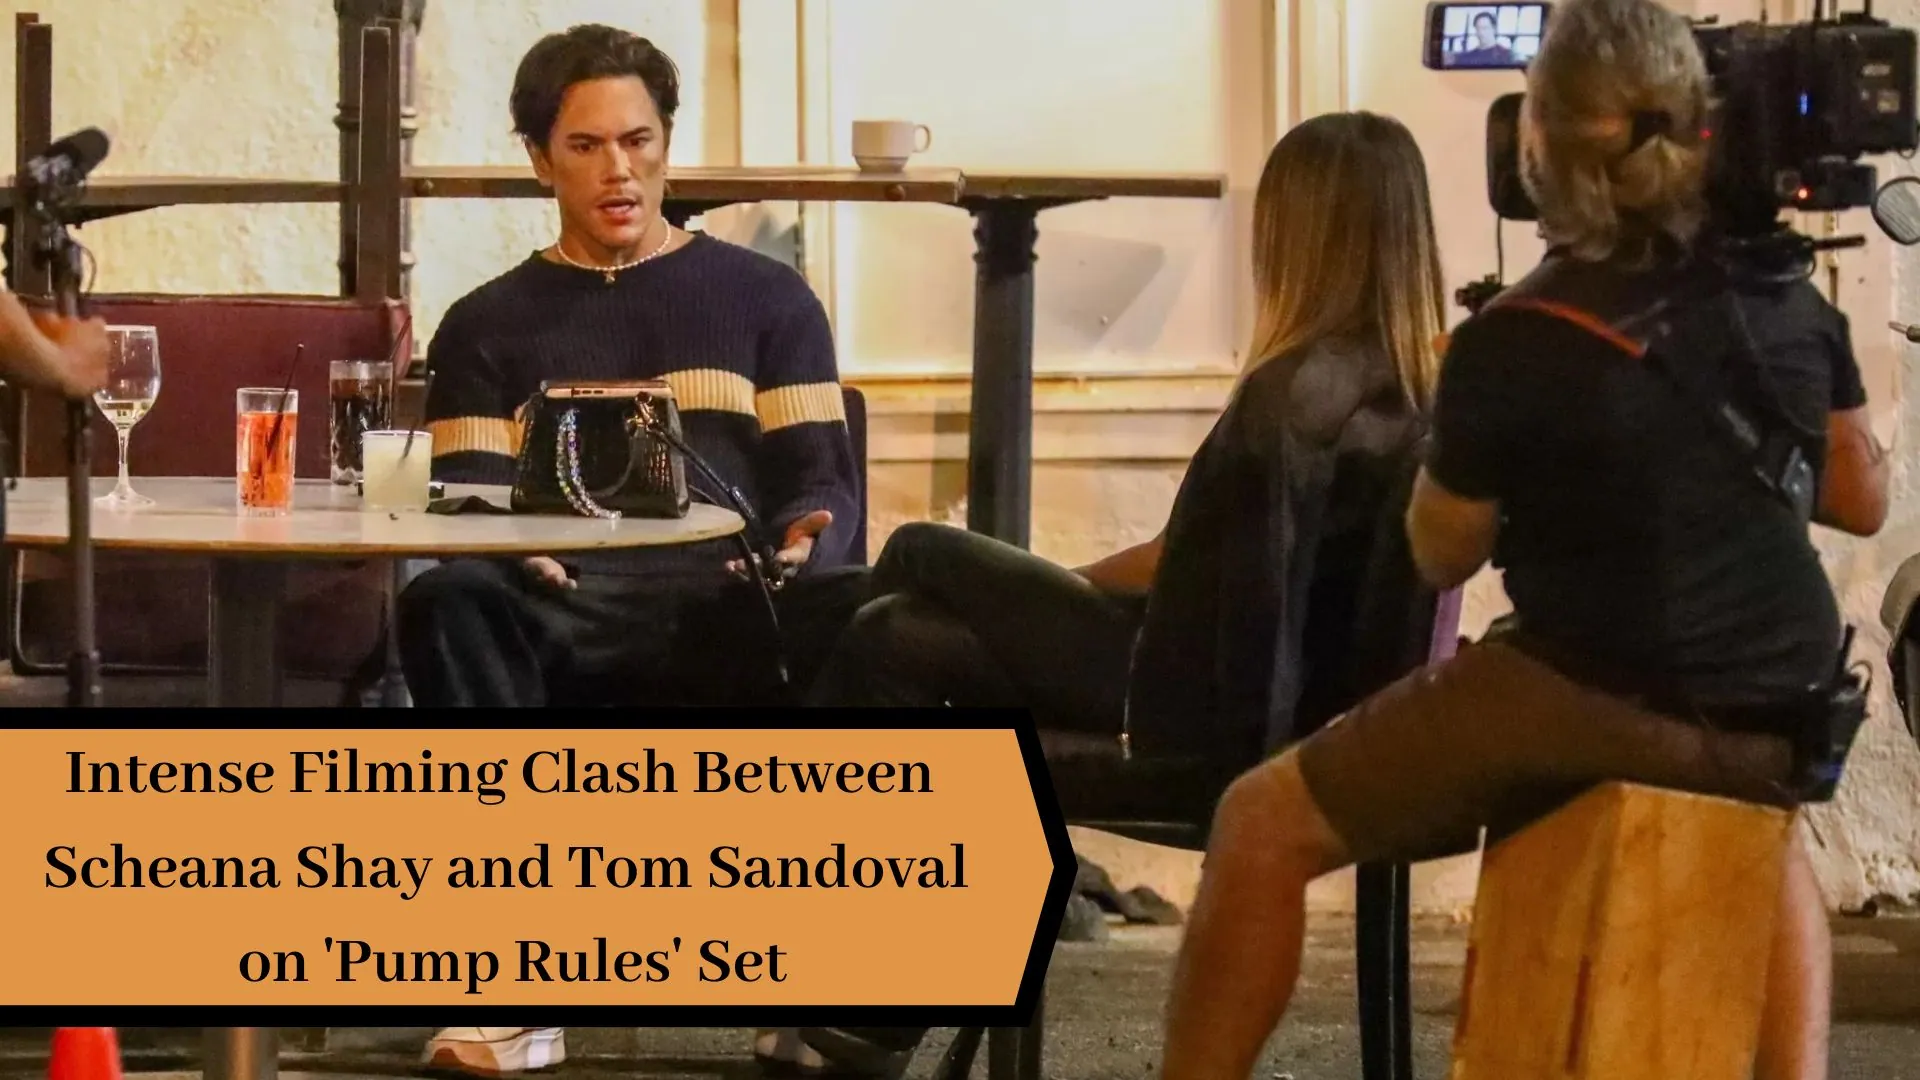 Intense Filming Clash Between Scheana Shay and Tom Sandoval on 'Pump Rules' Set